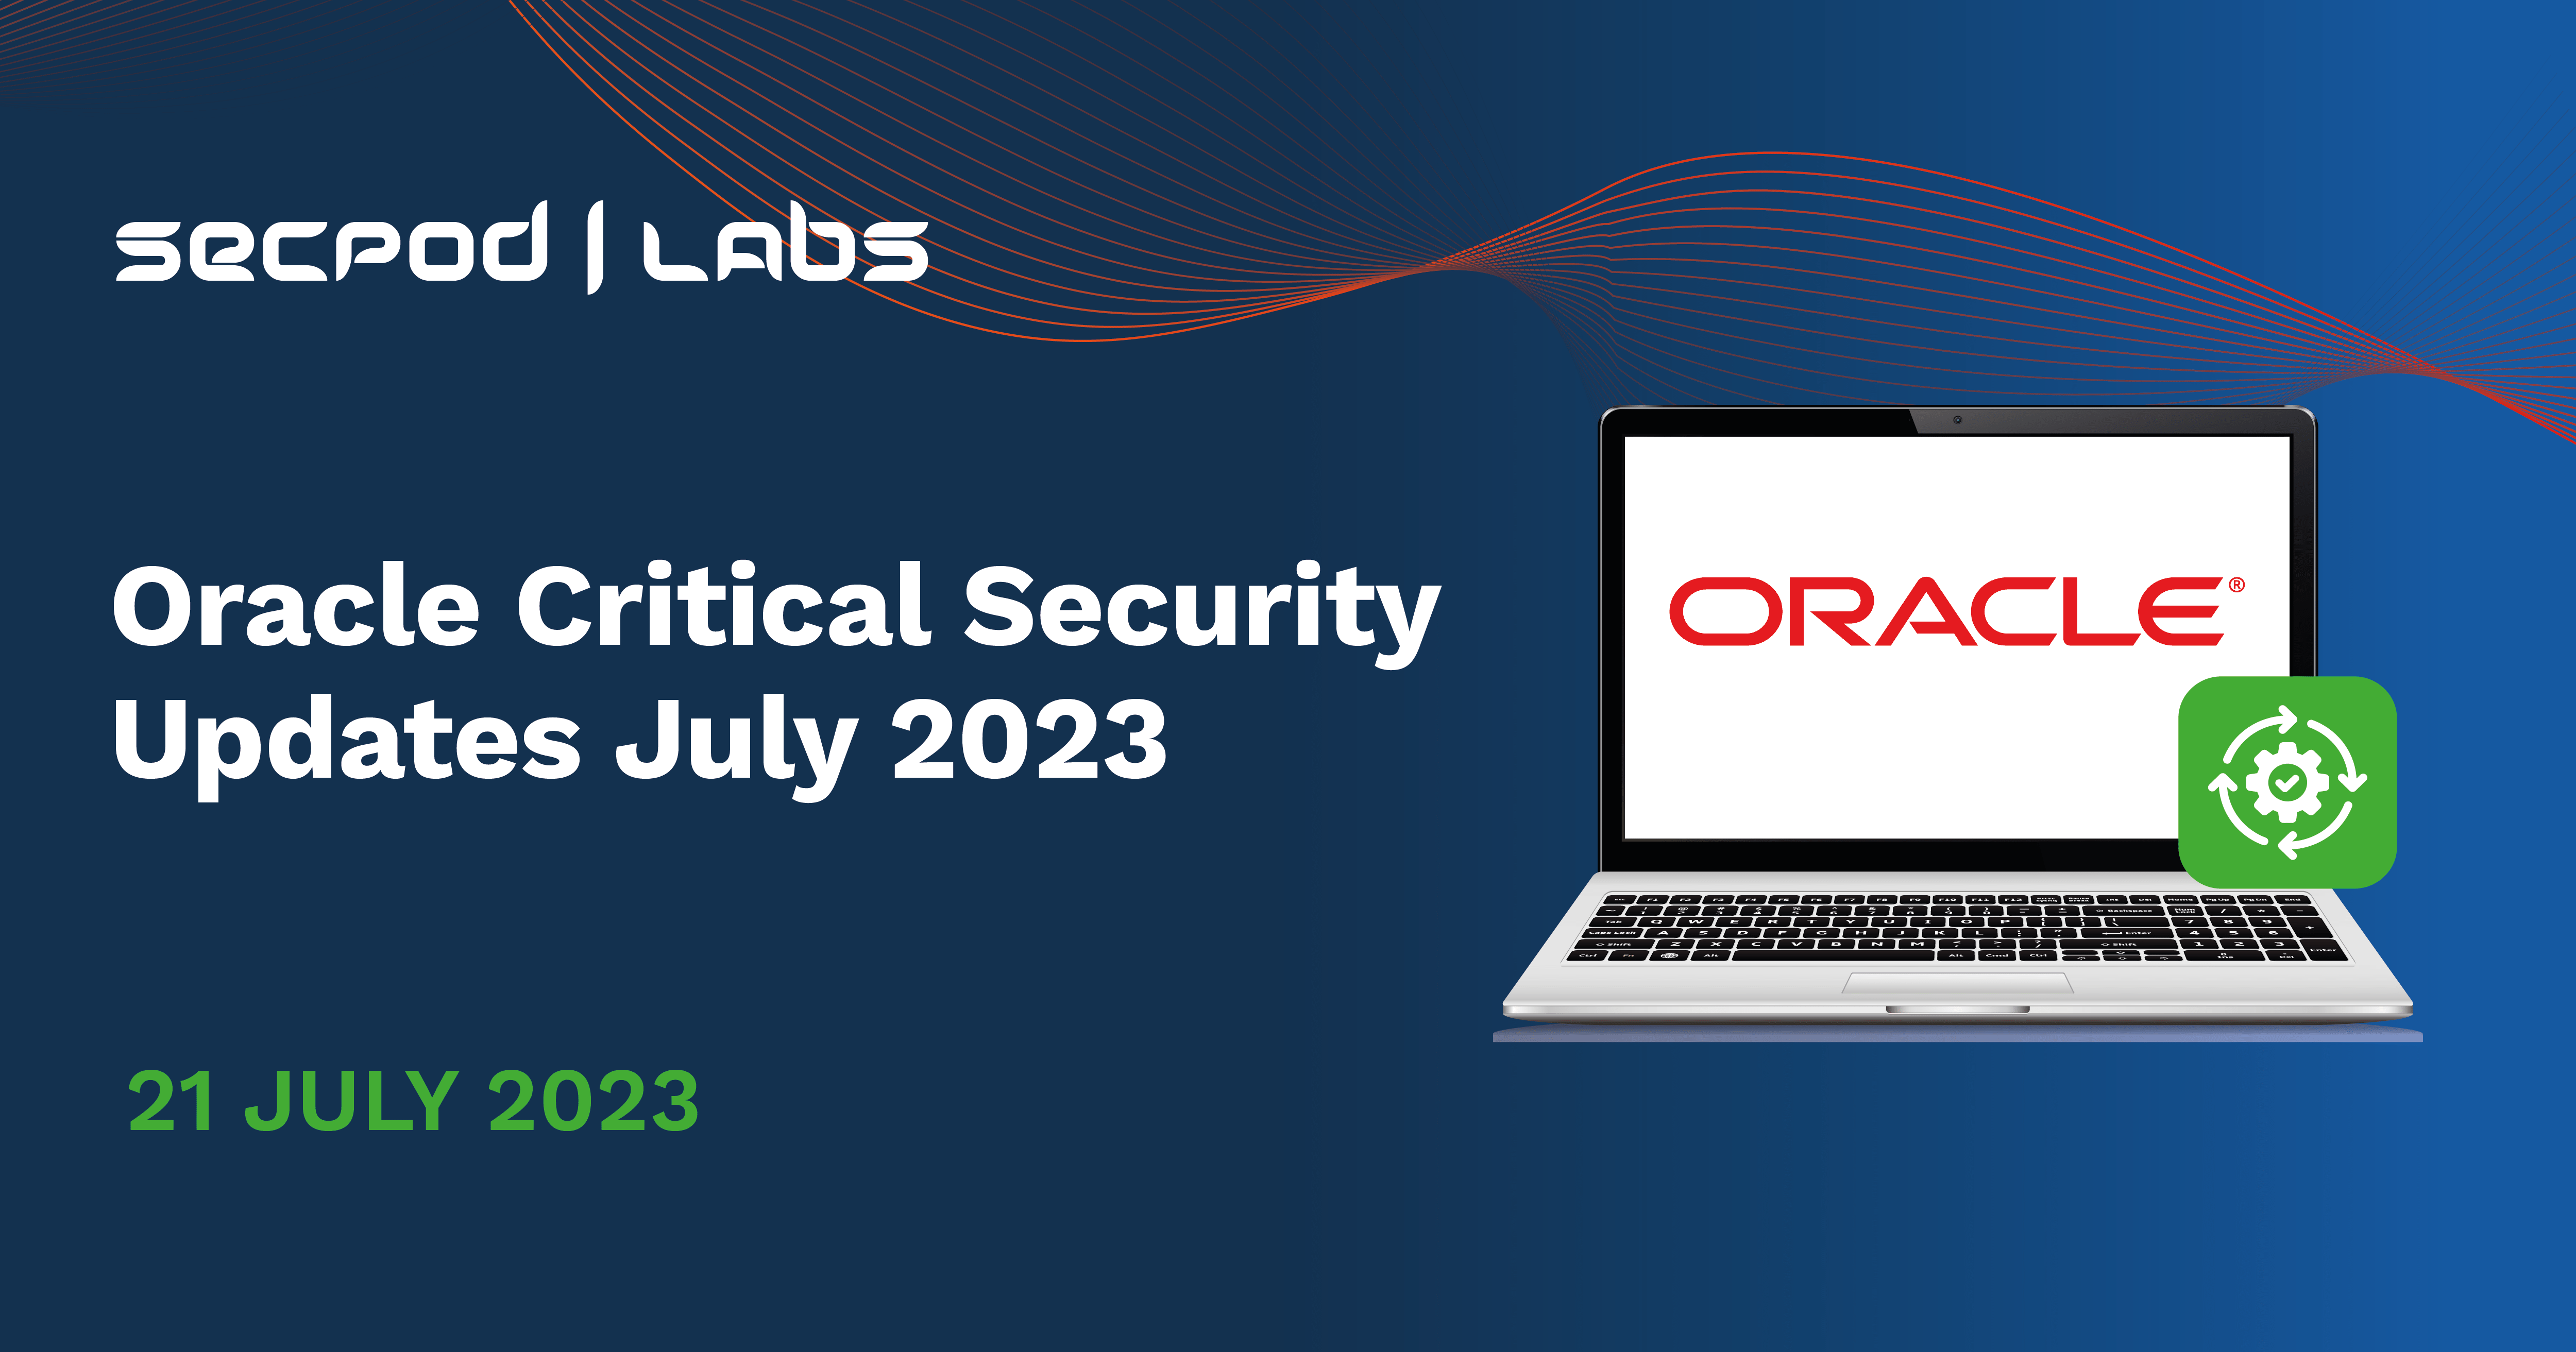 You are currently viewing Oracle Critical Security Updates July 2023